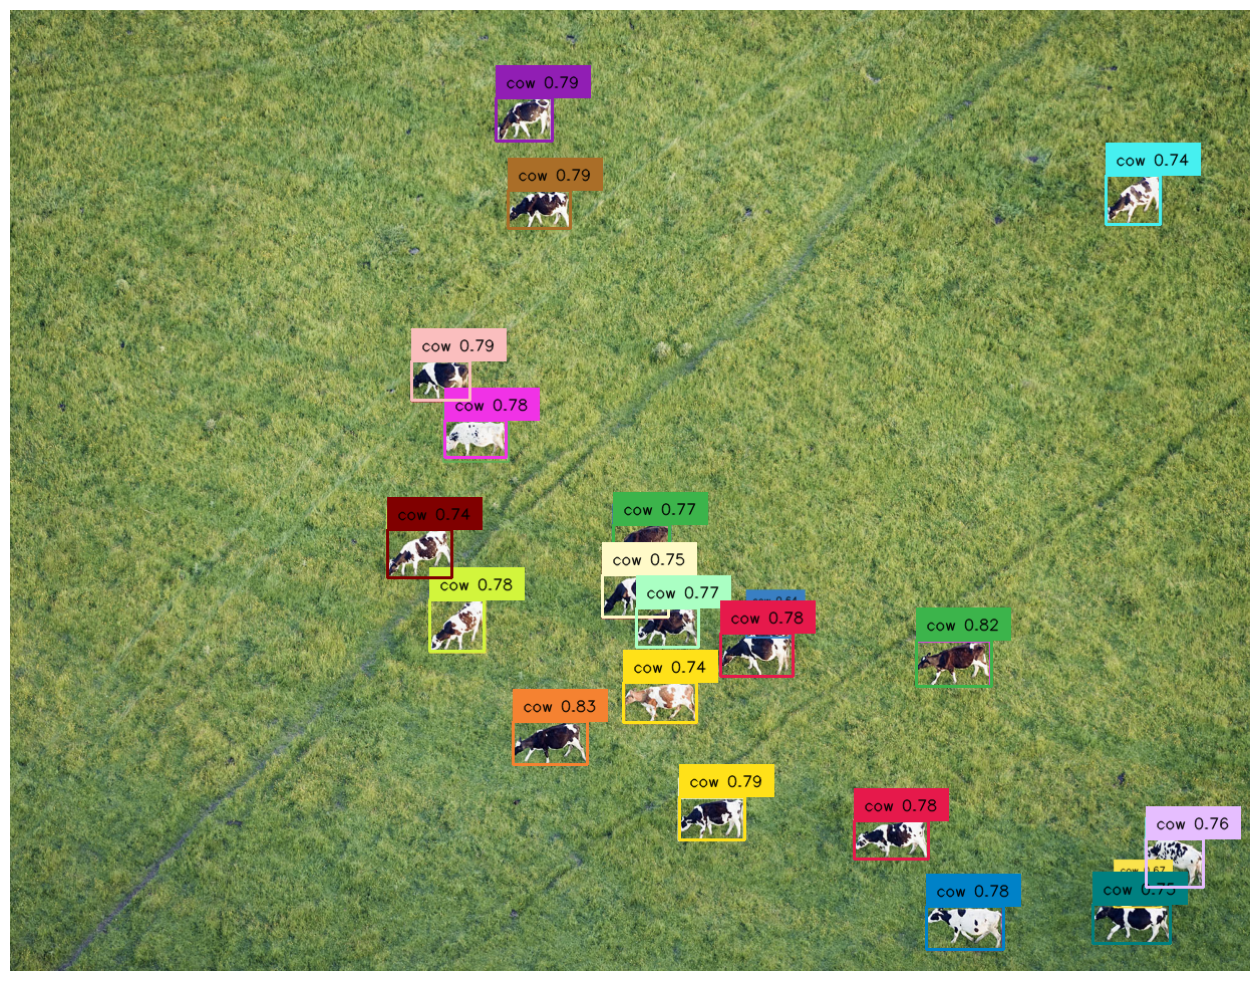 cows image recognition